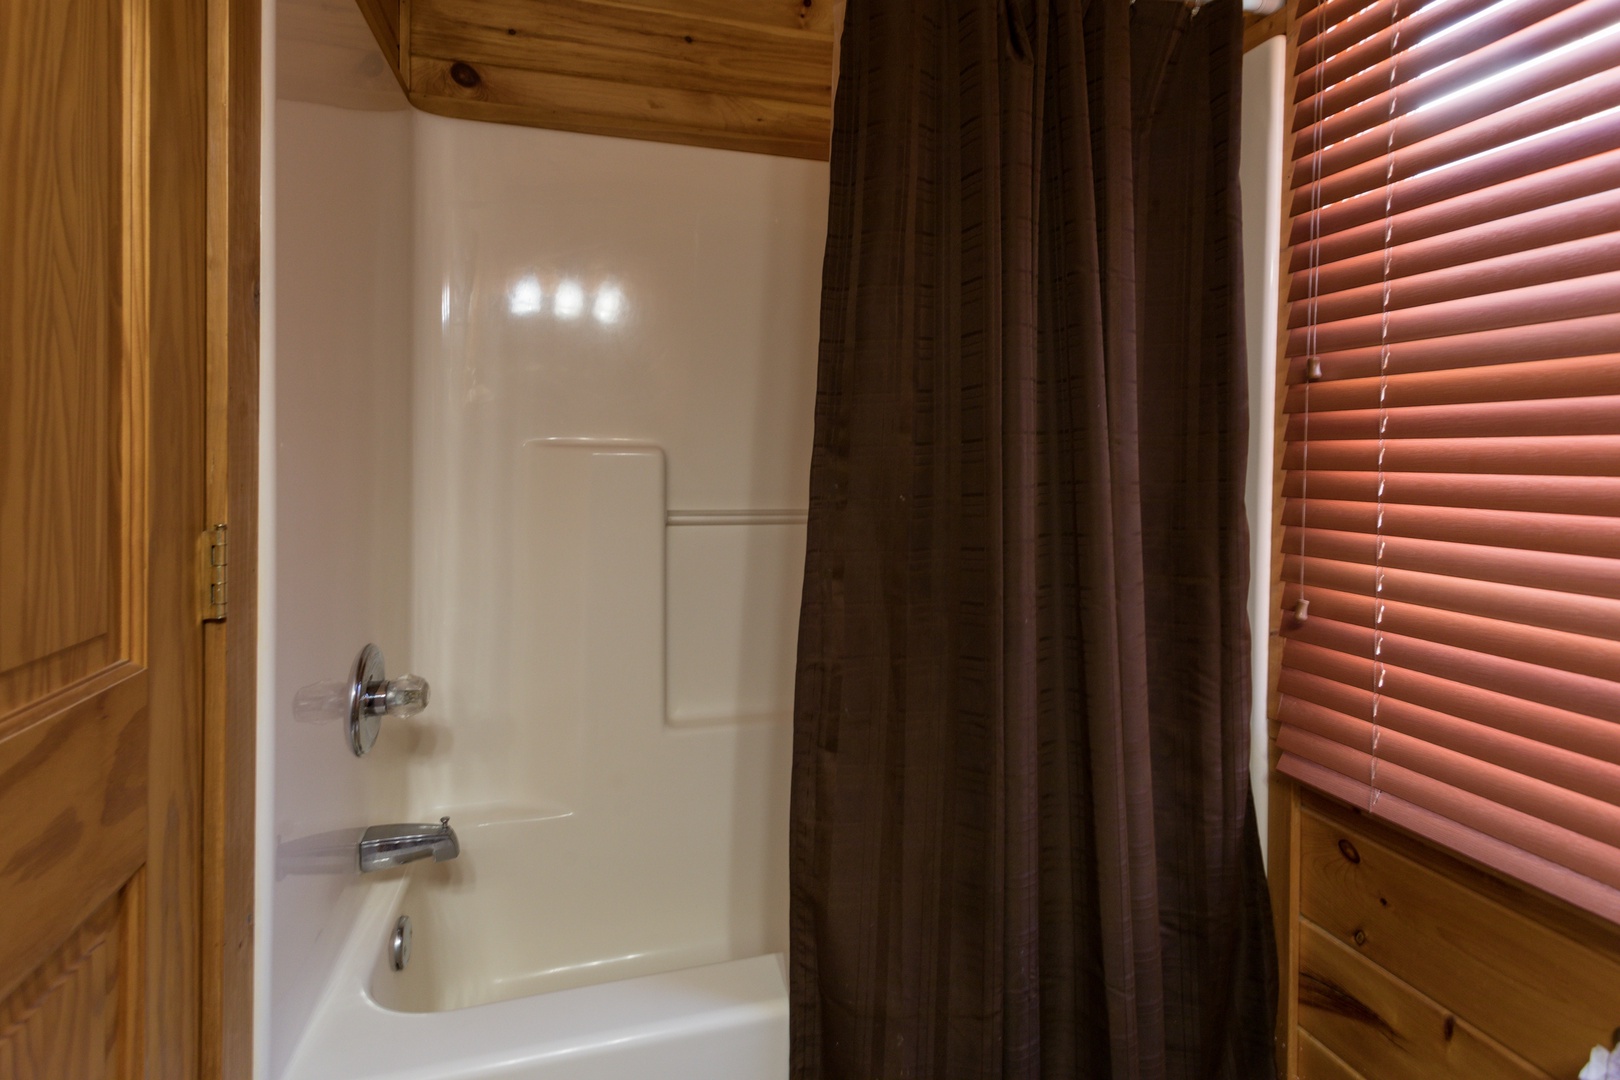 Bathroom with a tub and shower at Four Seasons Lodge, a 3-bedroom cabin rental located in Pigeon Forge